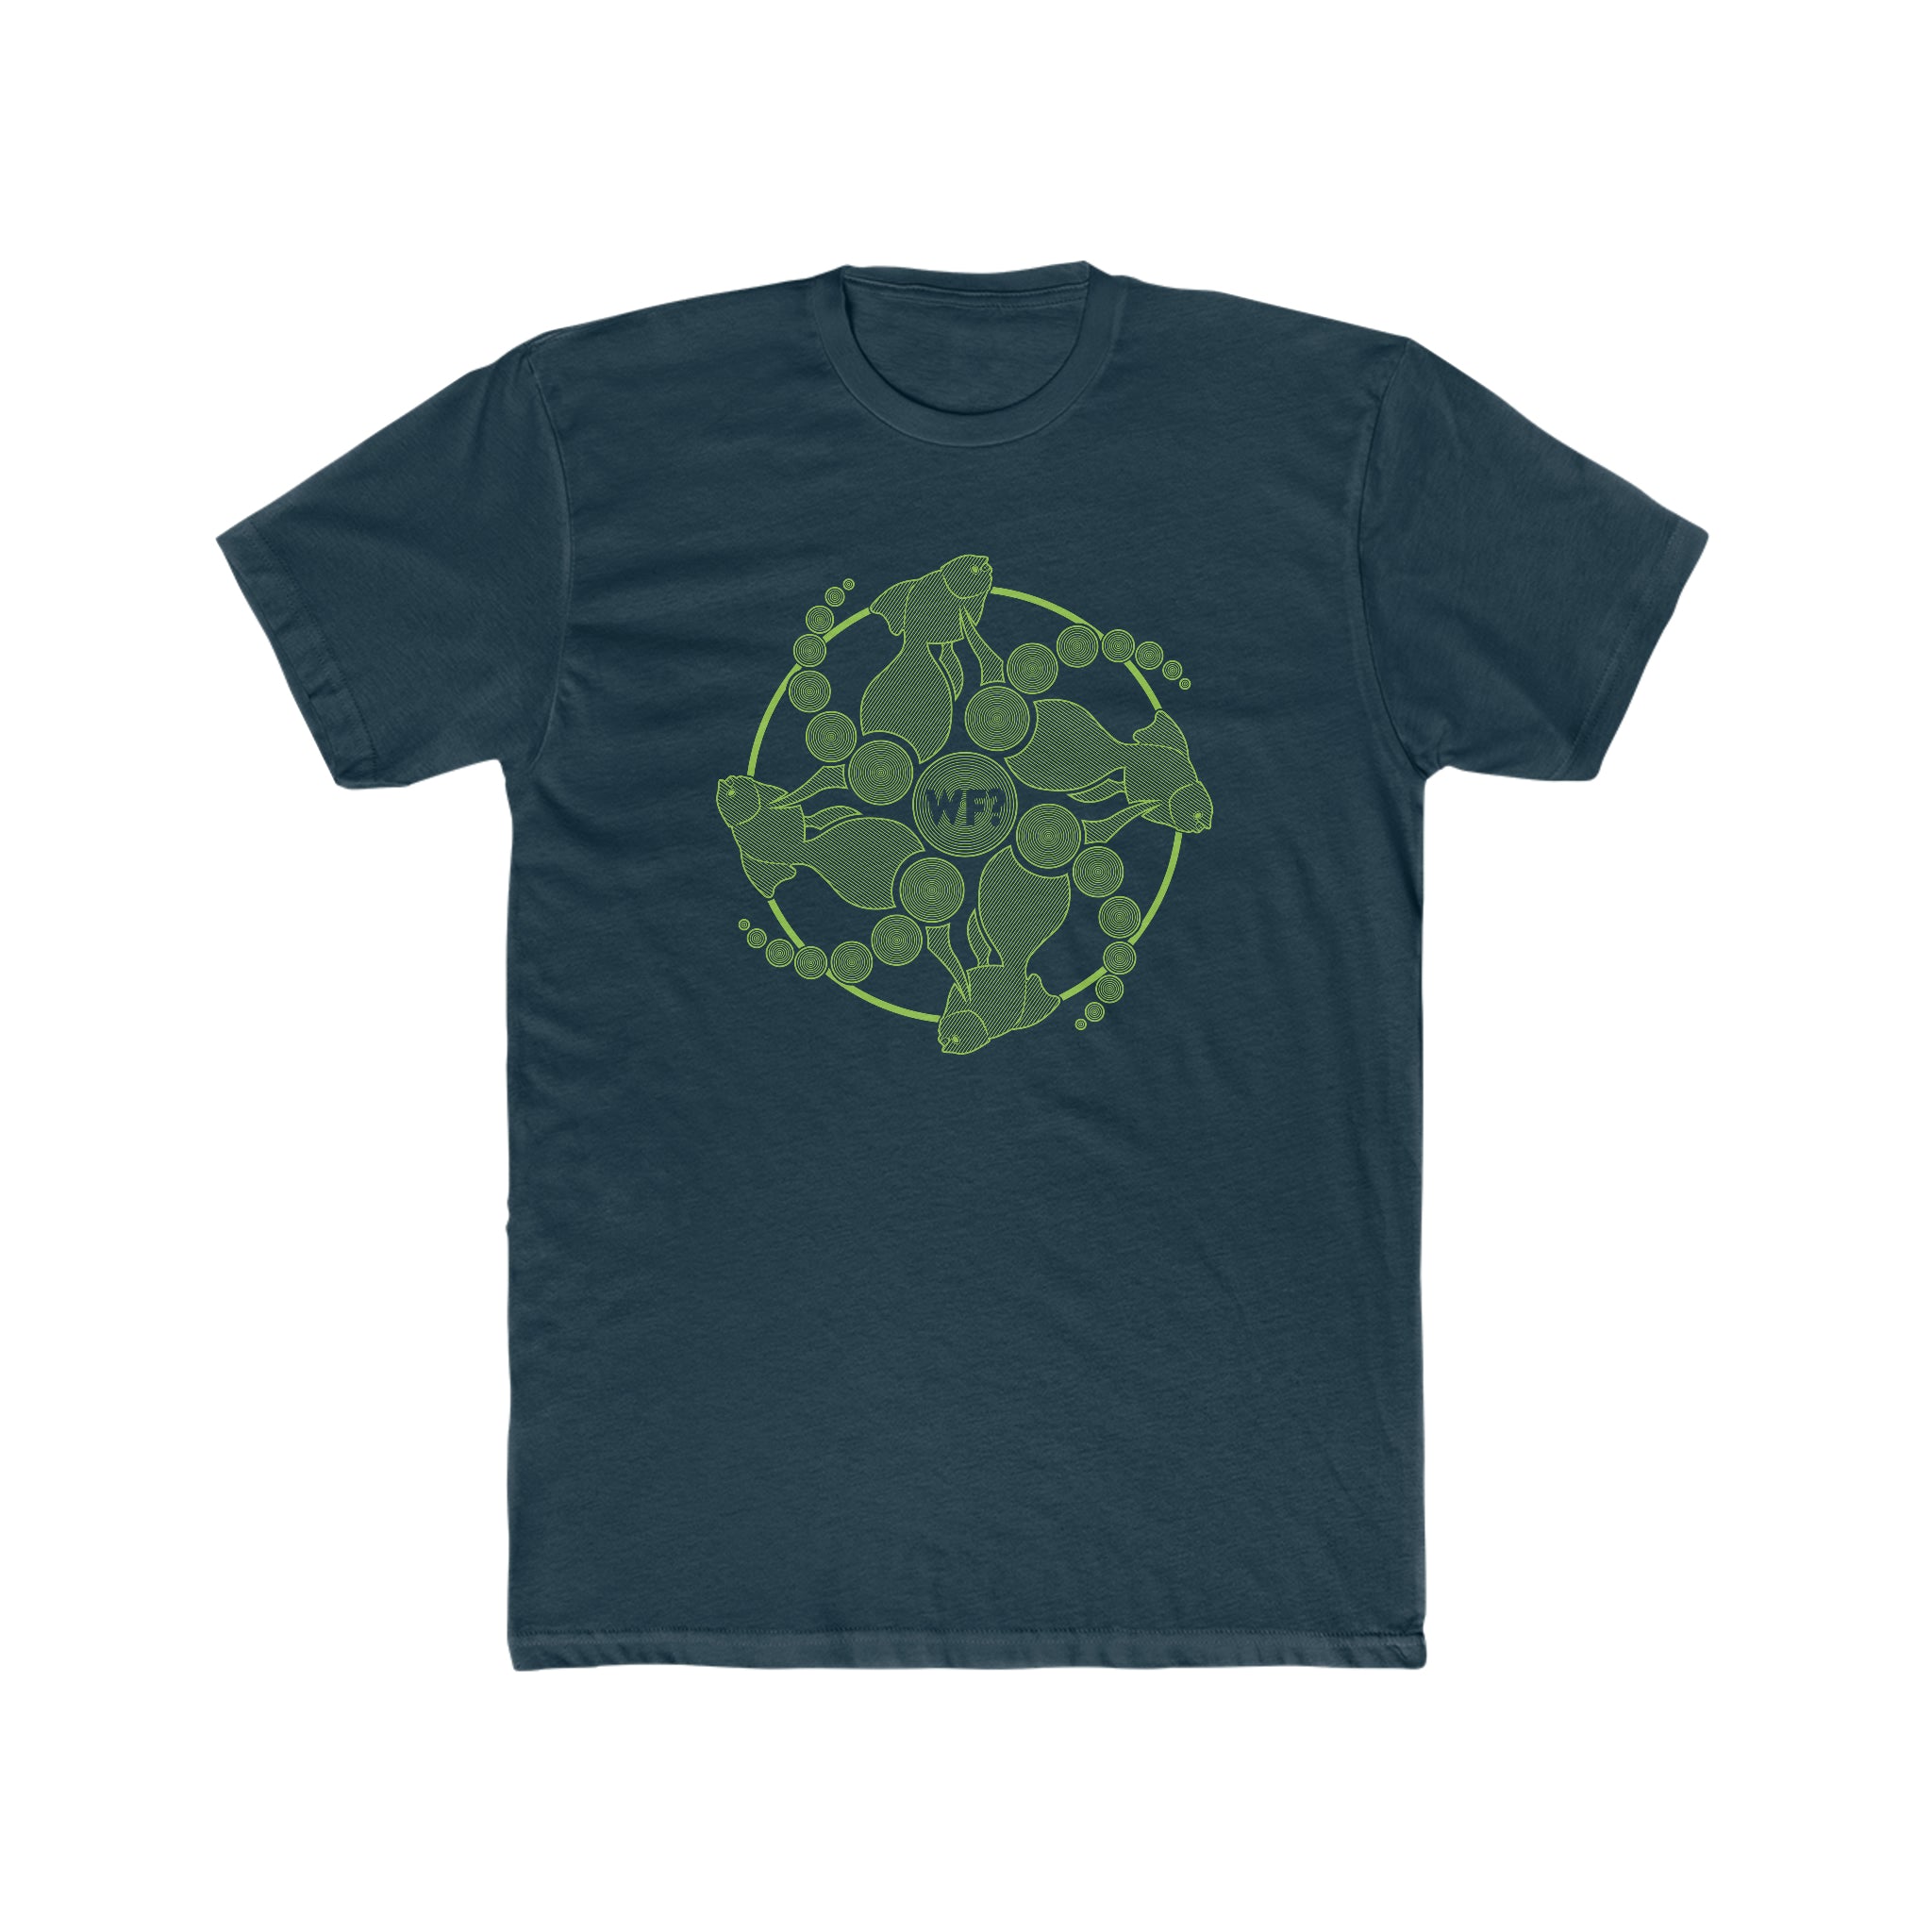 Buy solid-midnight-navy Crop Circles Limited T-Shirt